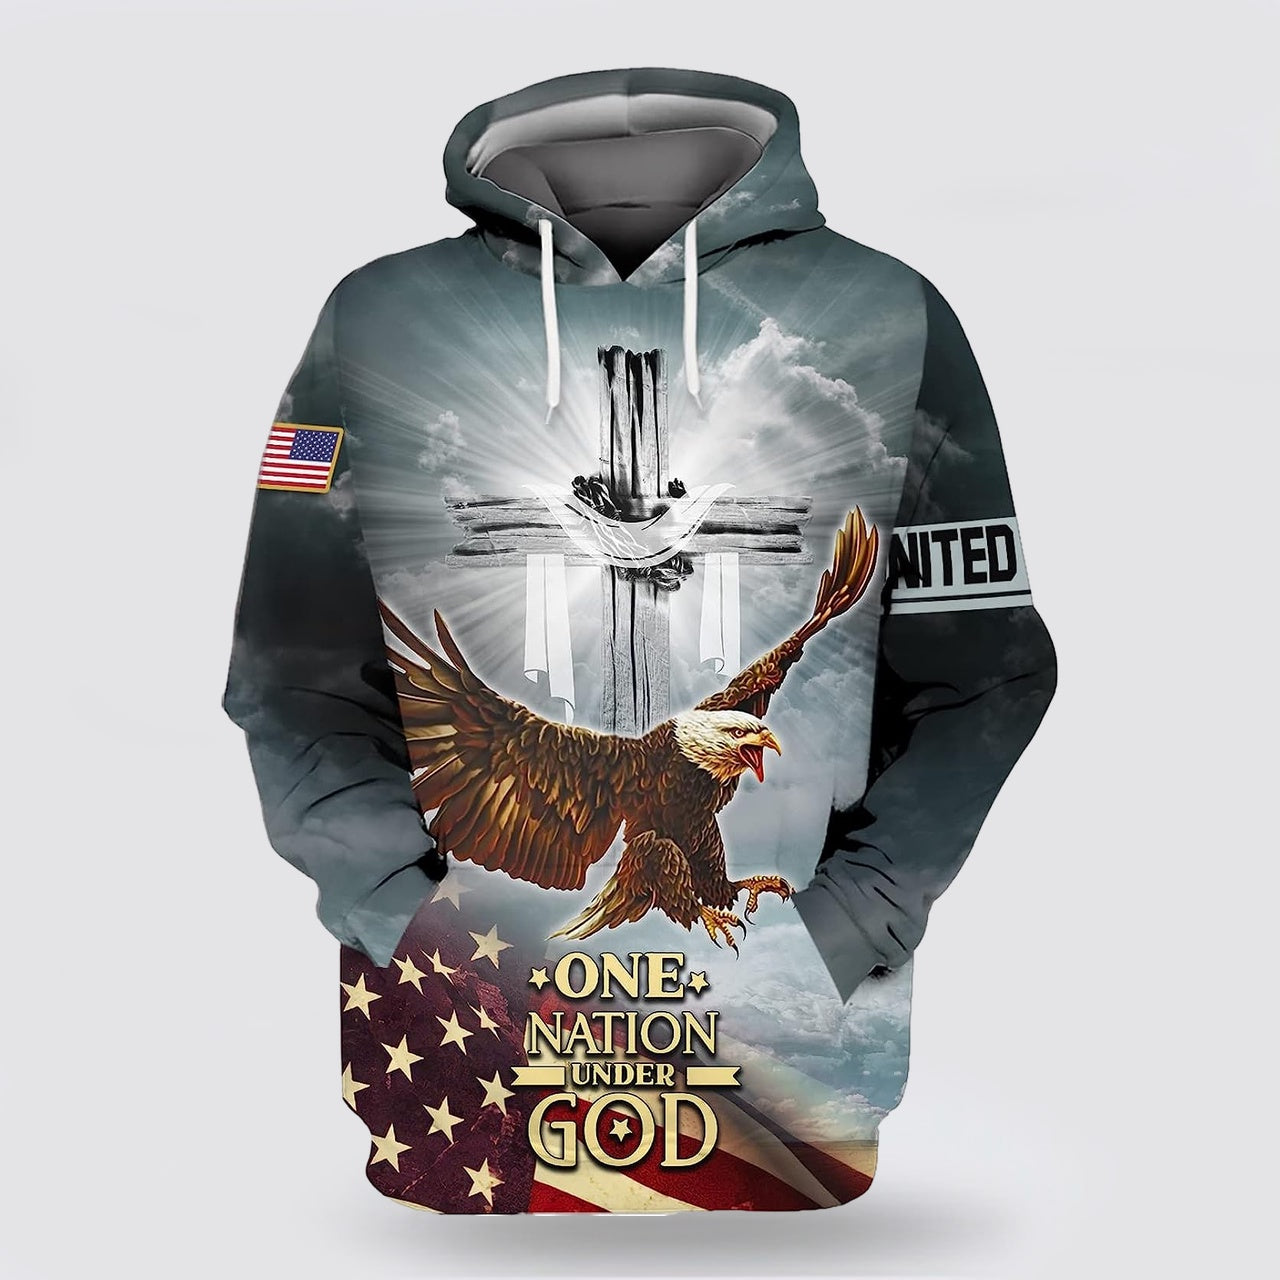 One Nation Under God American Flag With Jesus Cross 3d Hoodies For Women Men - Christian Apparel Hoodies